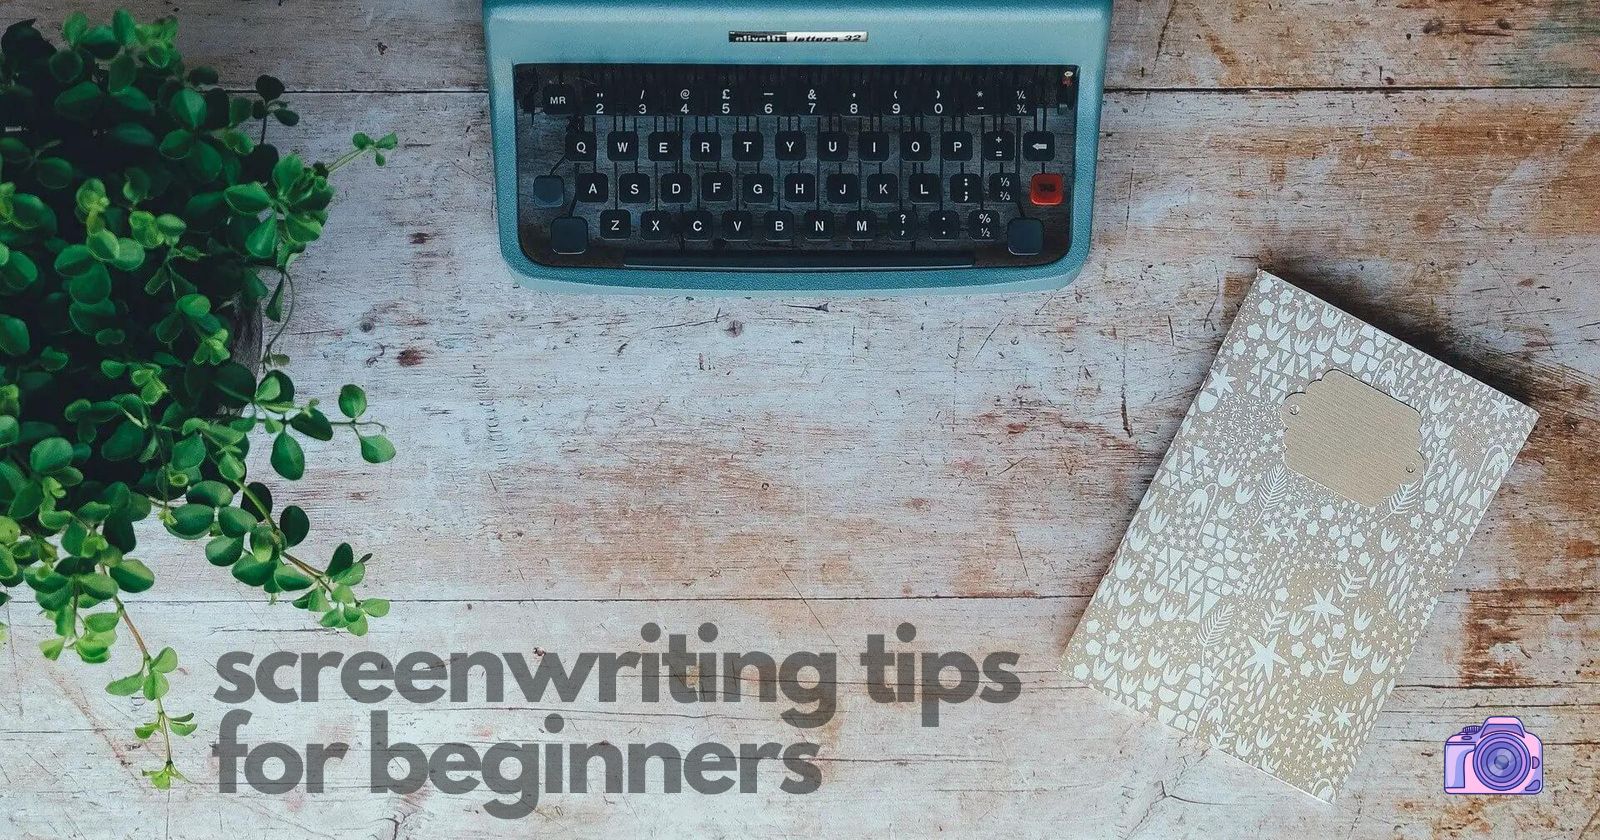 Screenwriting Tips for Beginners - Featured Image